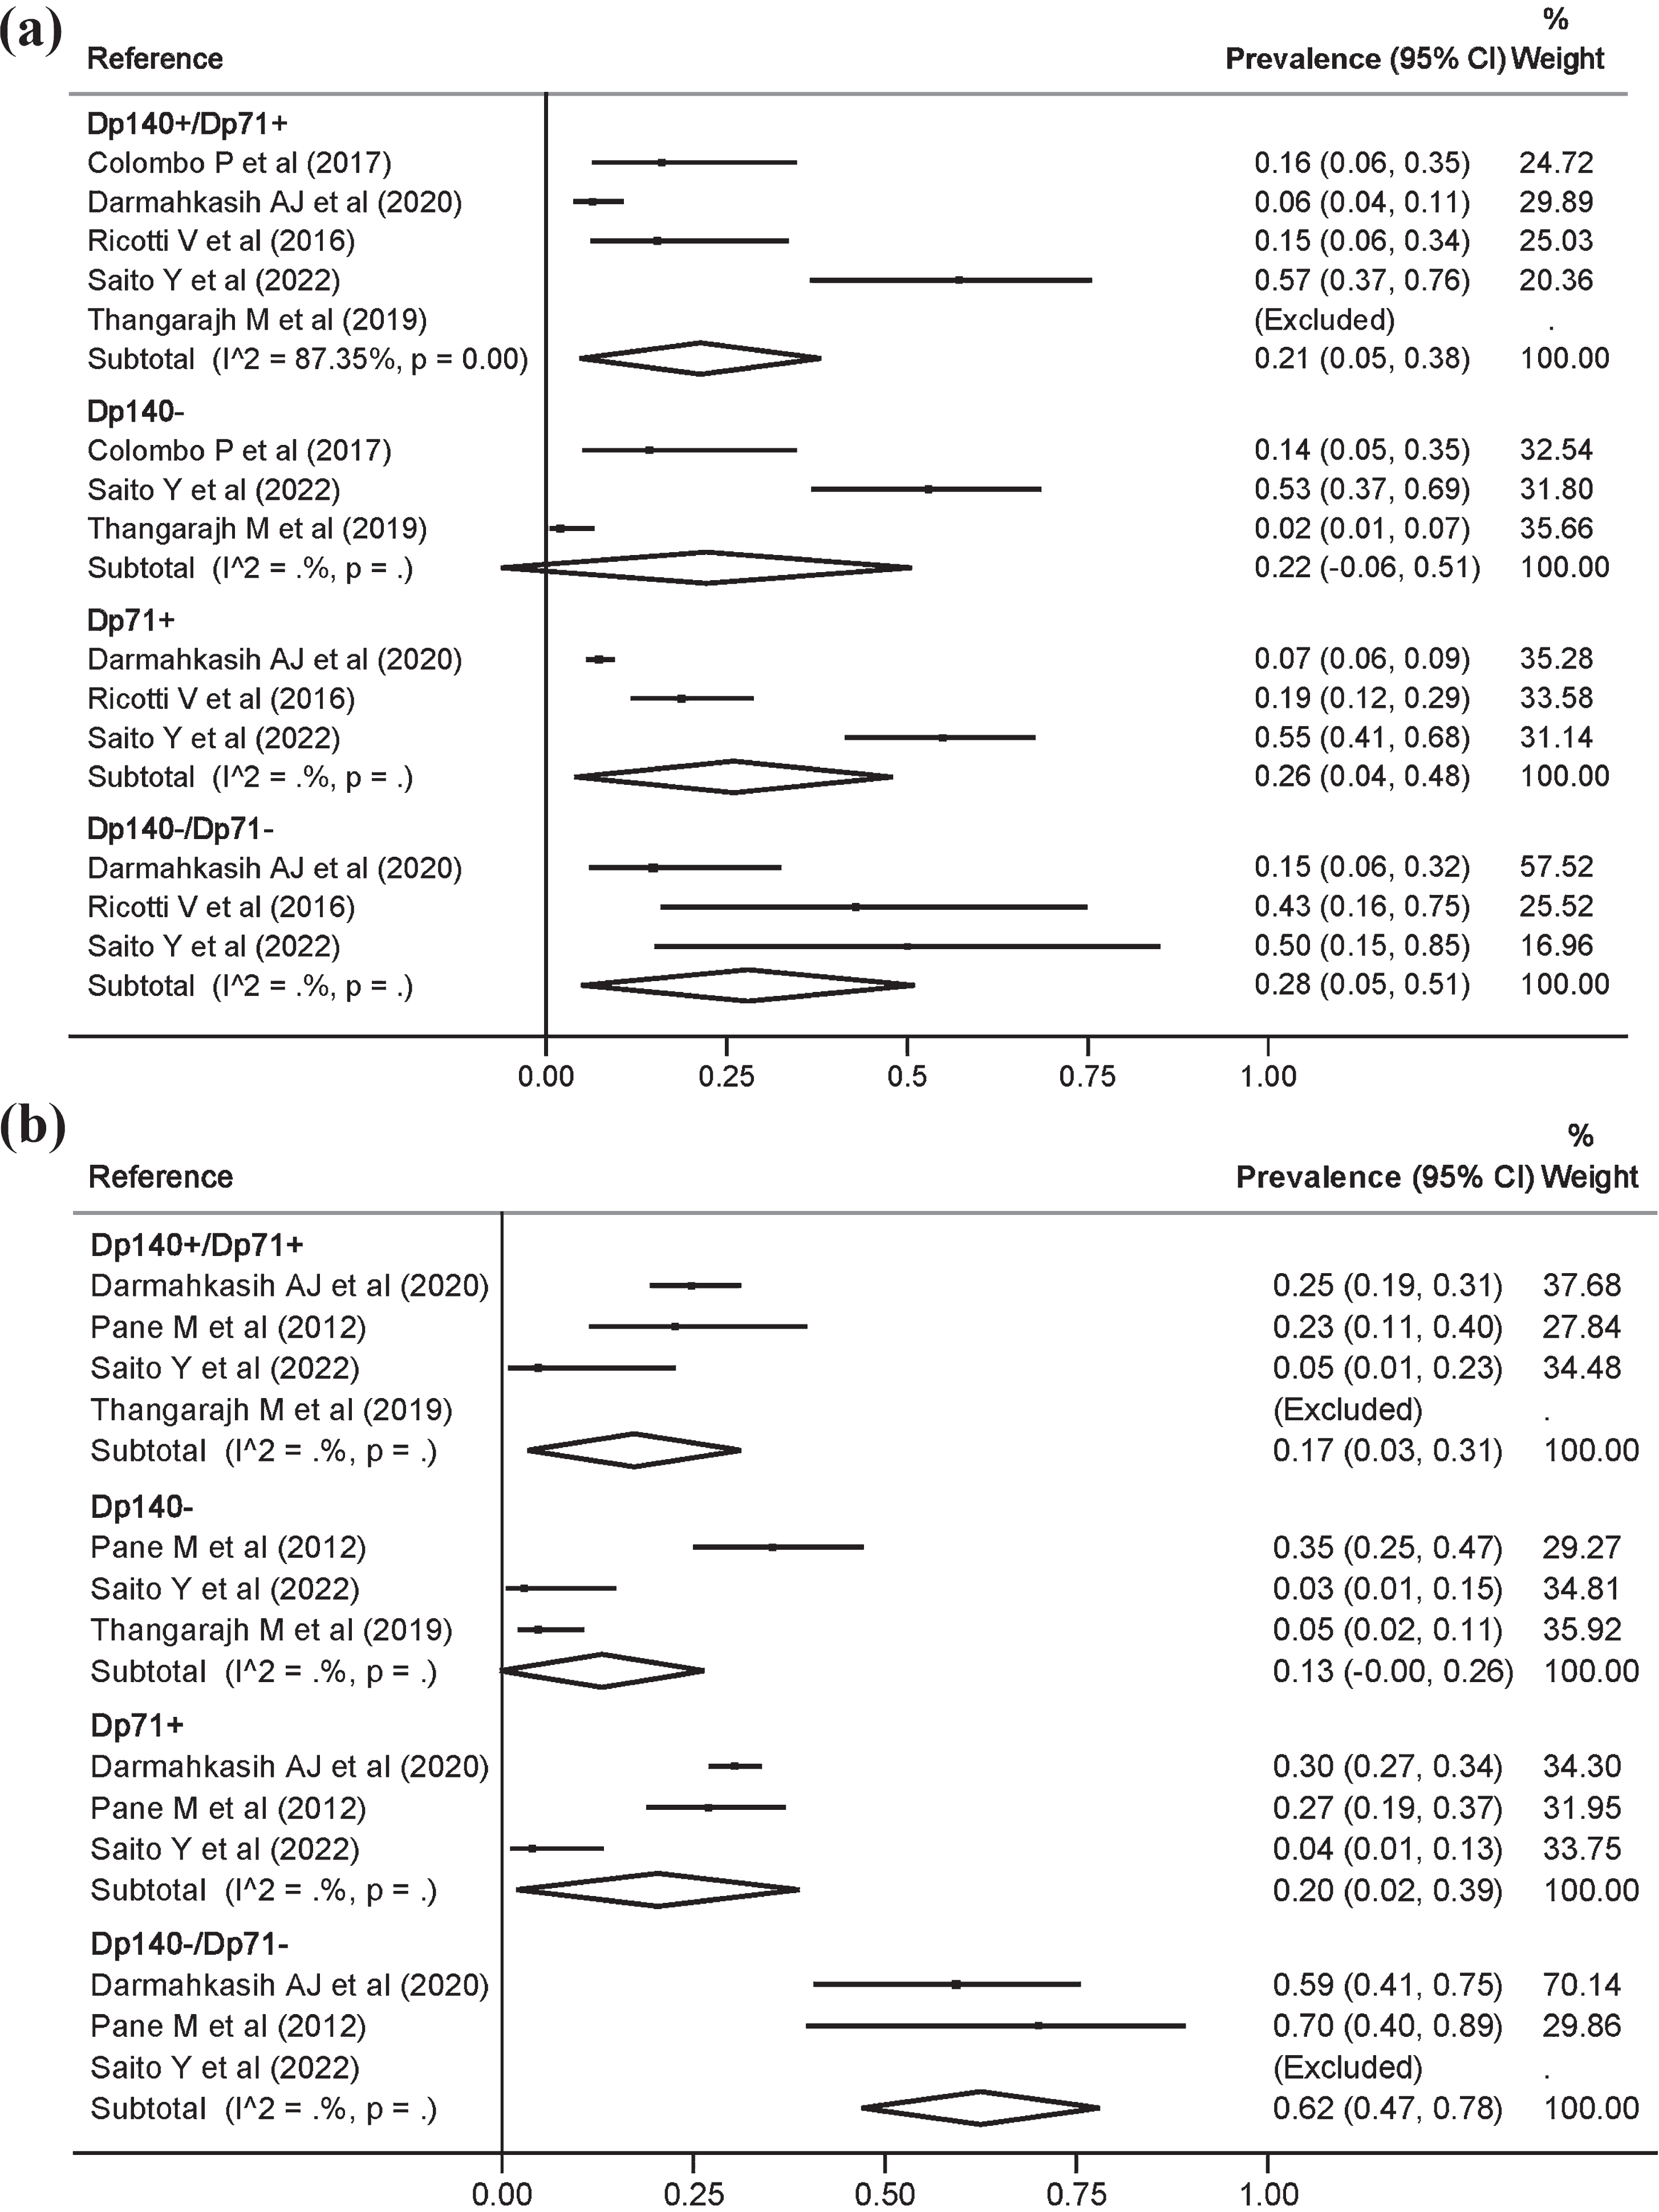 Meta-analysis of the prevalence and 95% confidence interval by genotype of autism spectrum disorders (a), and attention deficit hyperactivity disorder (b), in Duchenne muscular dystrophy.